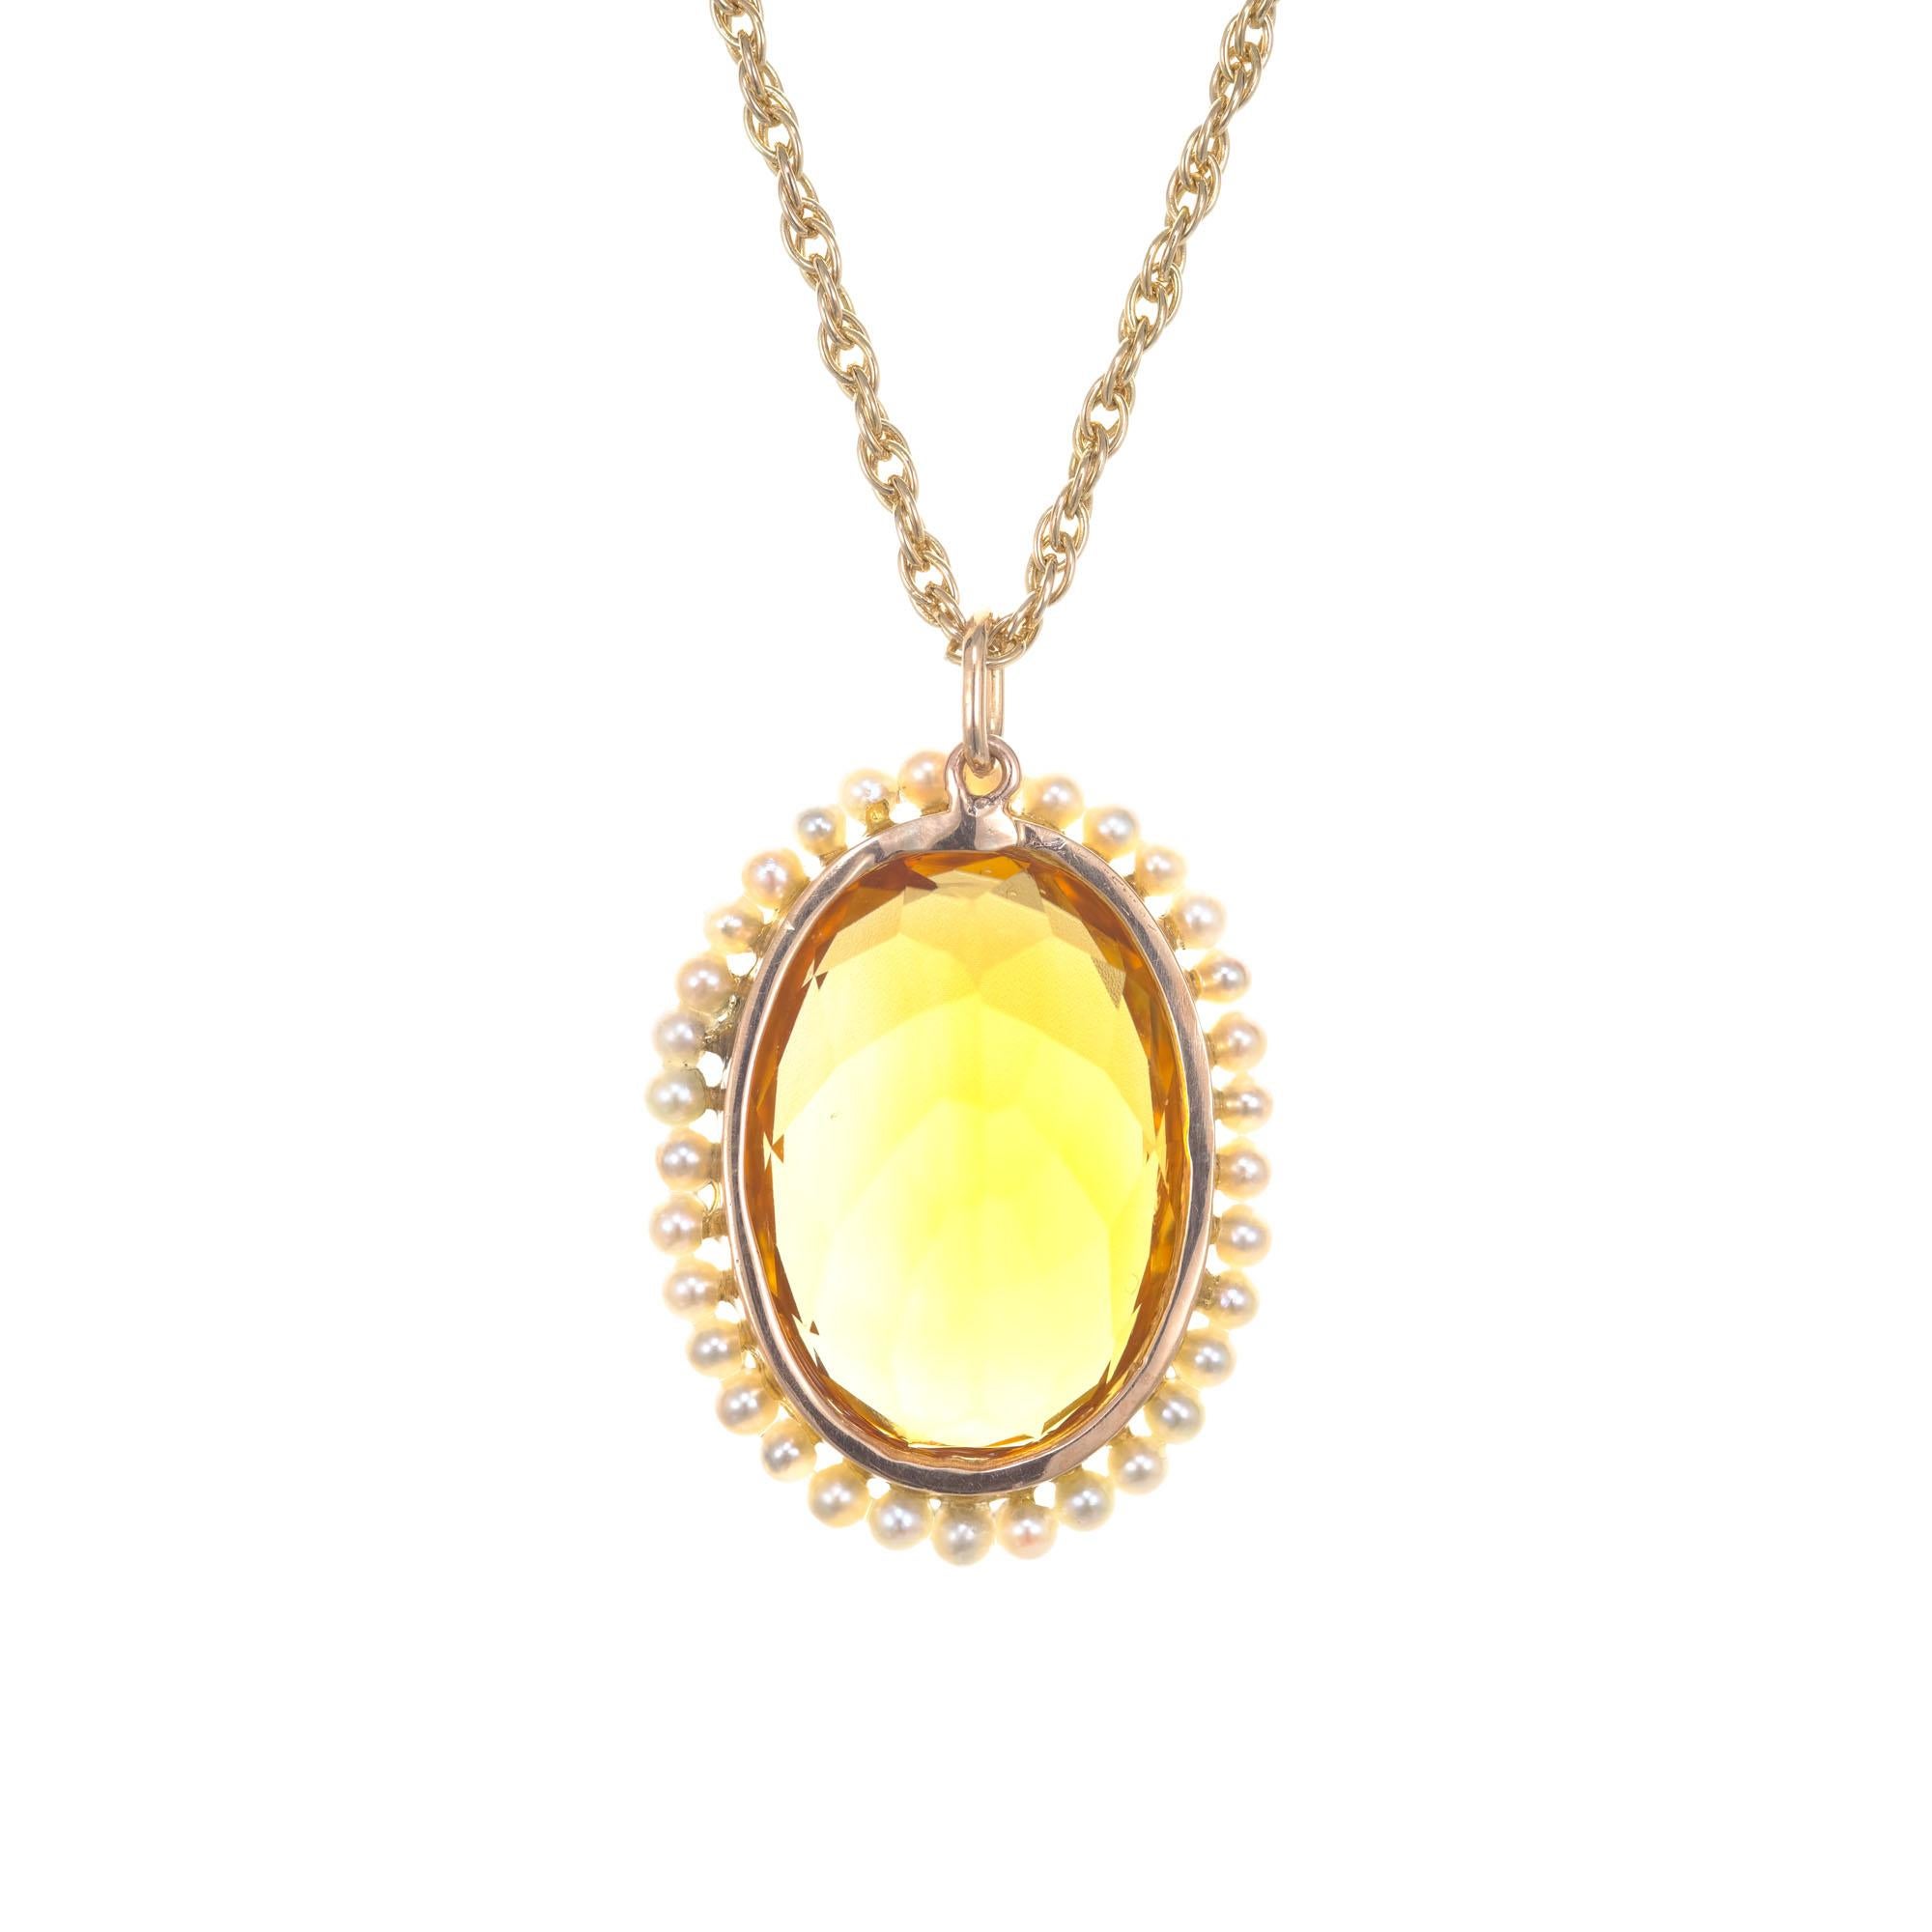 Vintage 1940's oval citrine and pearl pendant necklace. 12.00ct oval citrine in 14k yellow gold with a halo of cultured pearls on a 21 inch chain. 

1 oval orange citrine, approx. 12cts
33 white with gray overtones cultured pearls
14k yellow gold